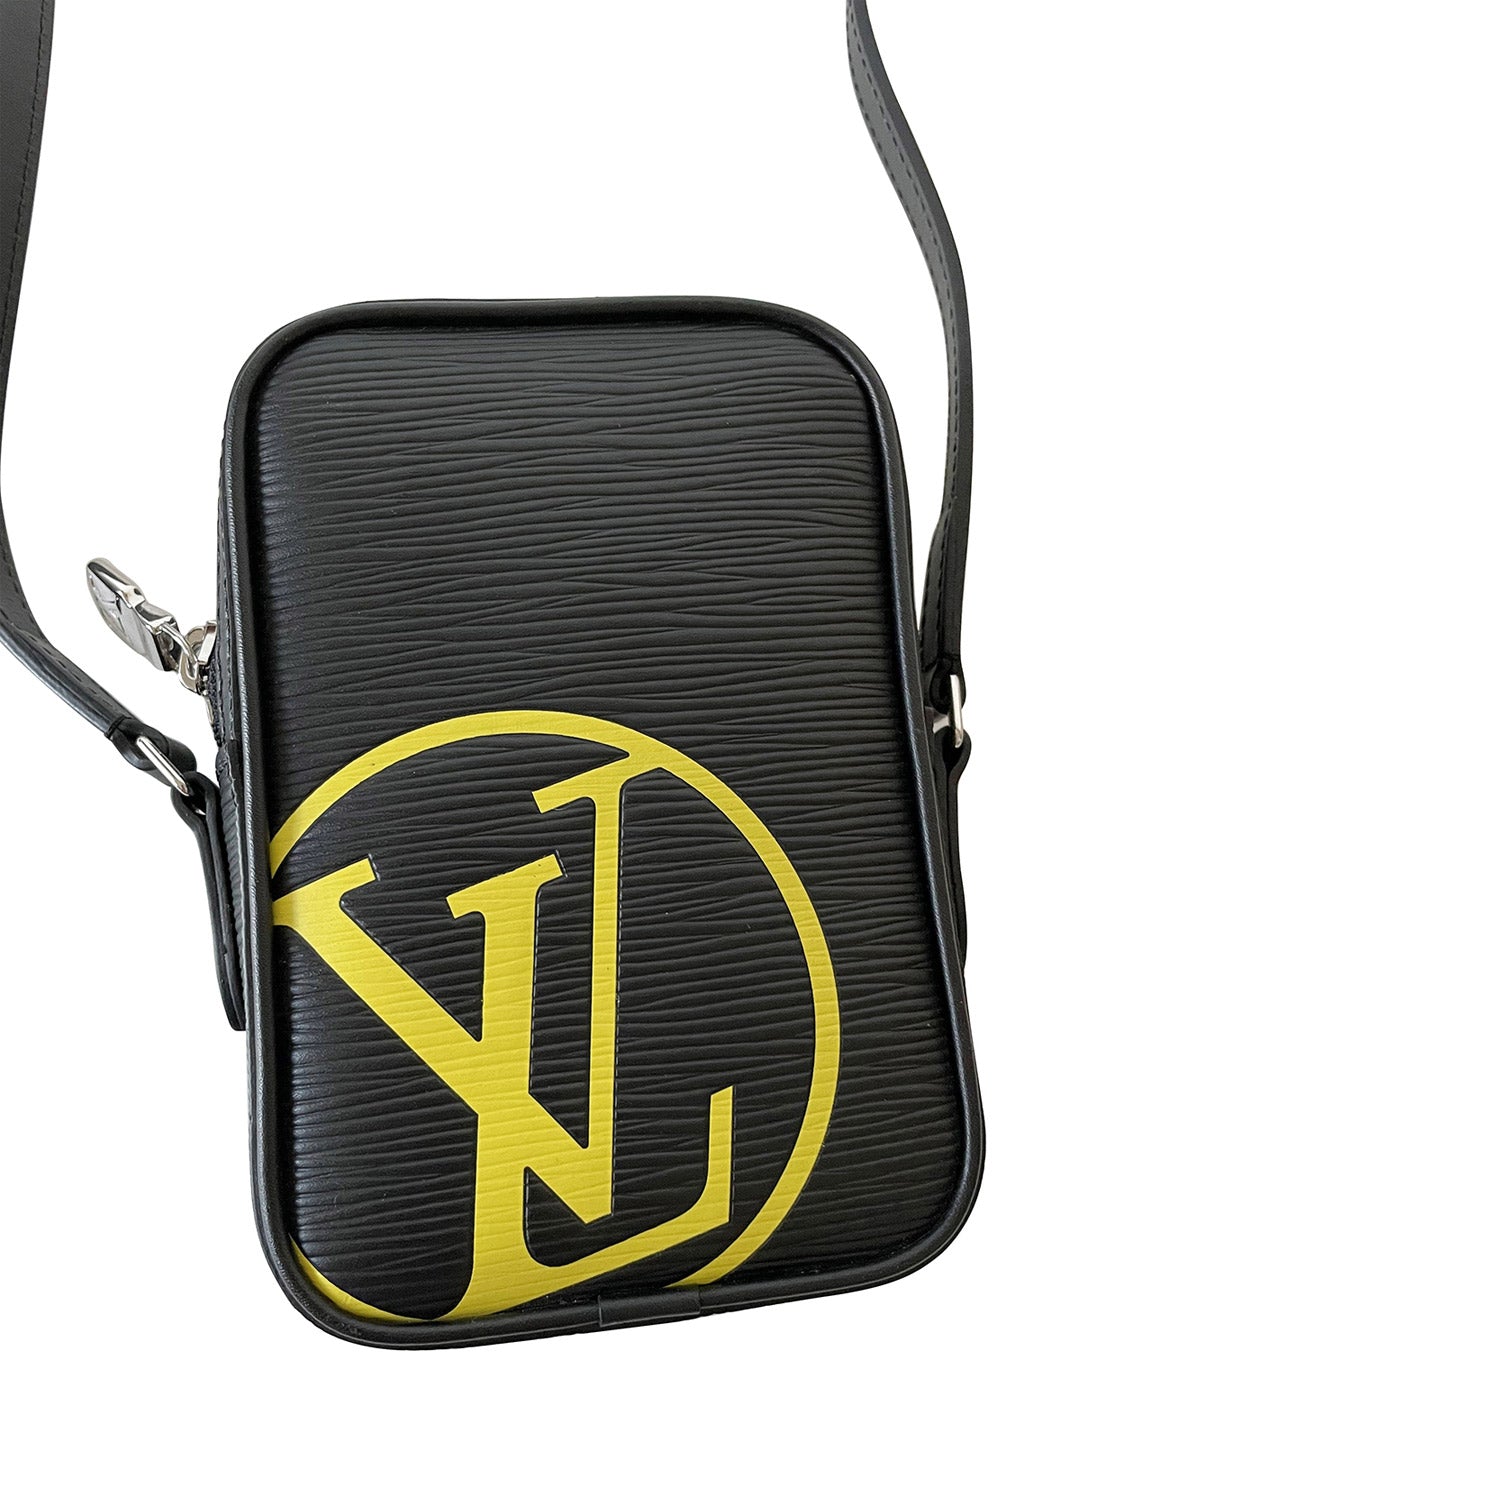 Shop authentic Louis Vuitton Taigarama Outdoor Messenger at revogue for  just USD 1,600.00